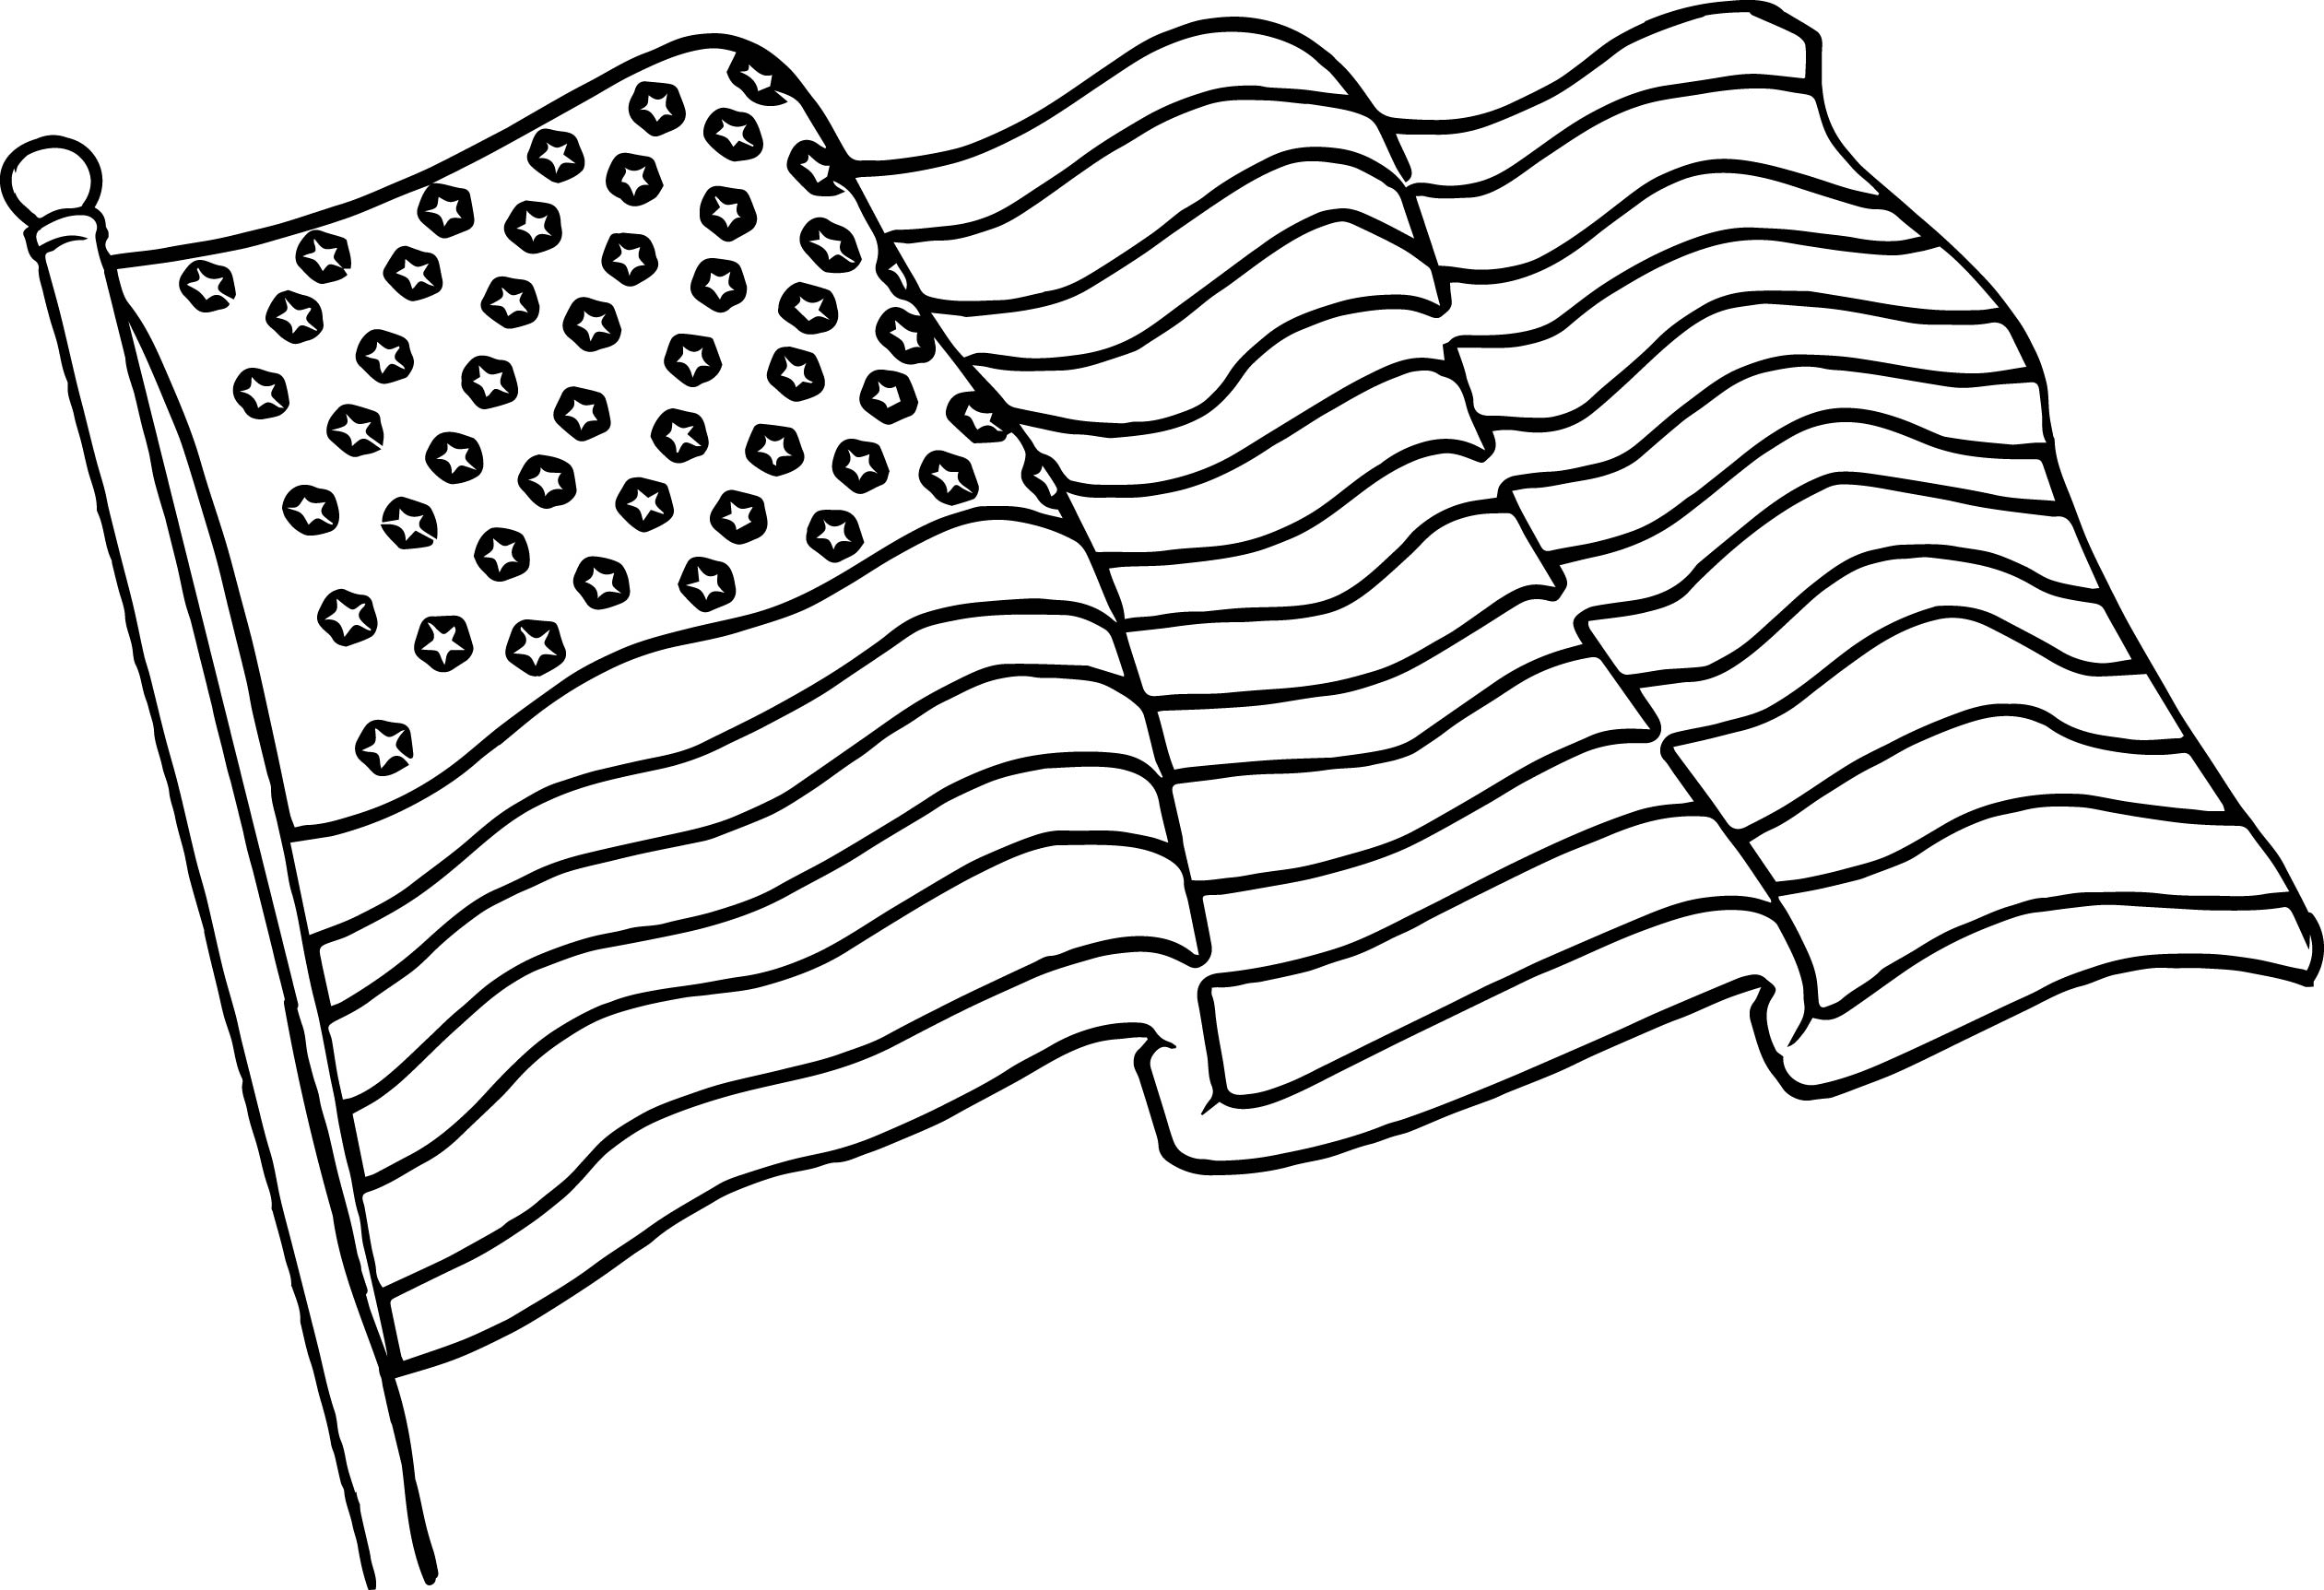 The Best Free Us Flag Drawing Images Download From 2694 Free Drawings 